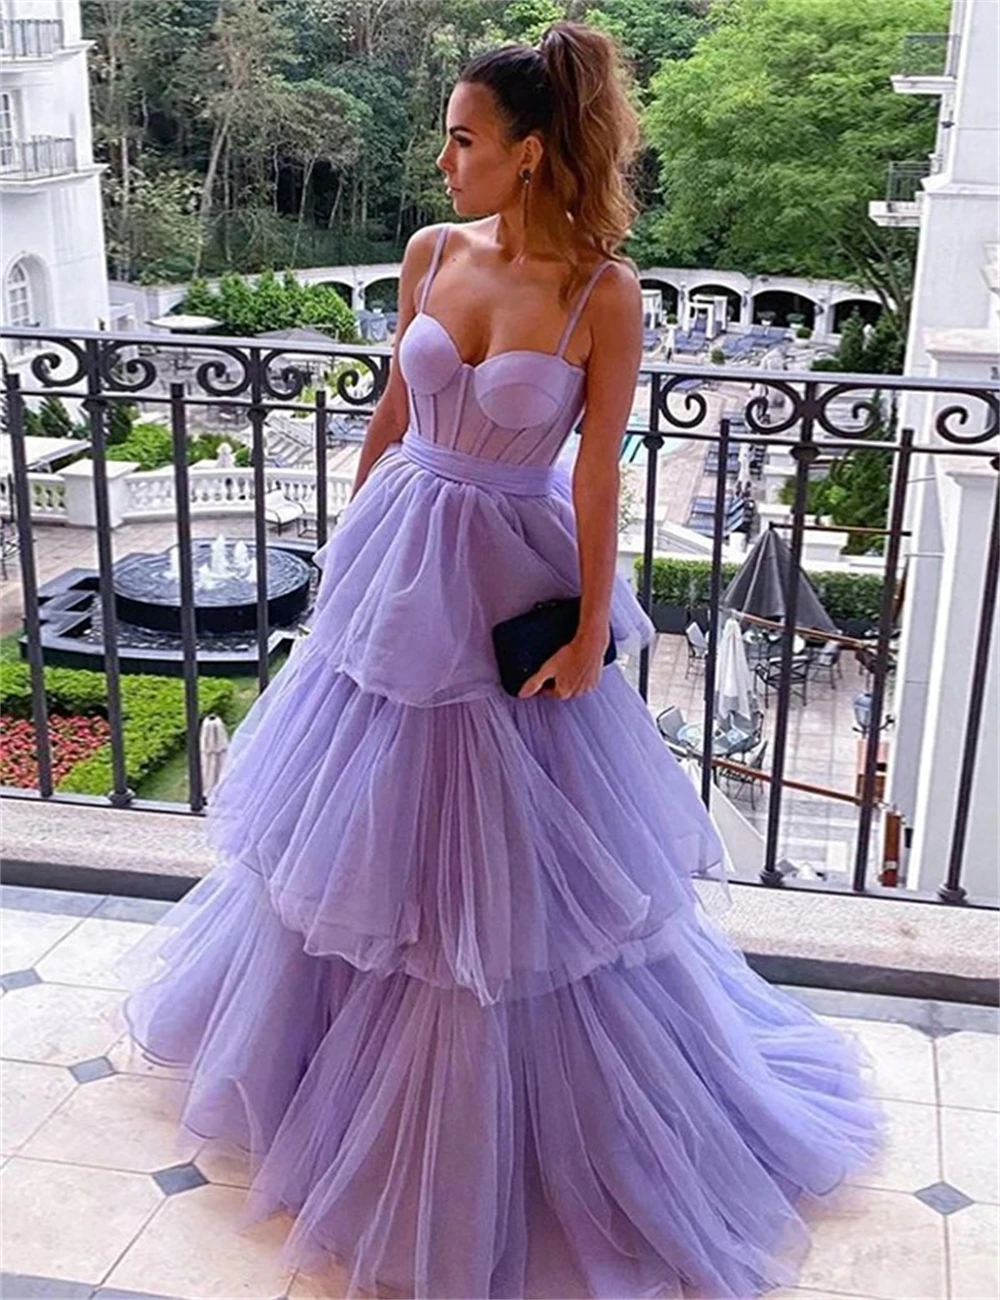 

Stunning Prom Dresses Corset A-Line Princess Solid Color Party Dress Spaghetti Straps Sleeveless Floor-Length Tulle with Tiered